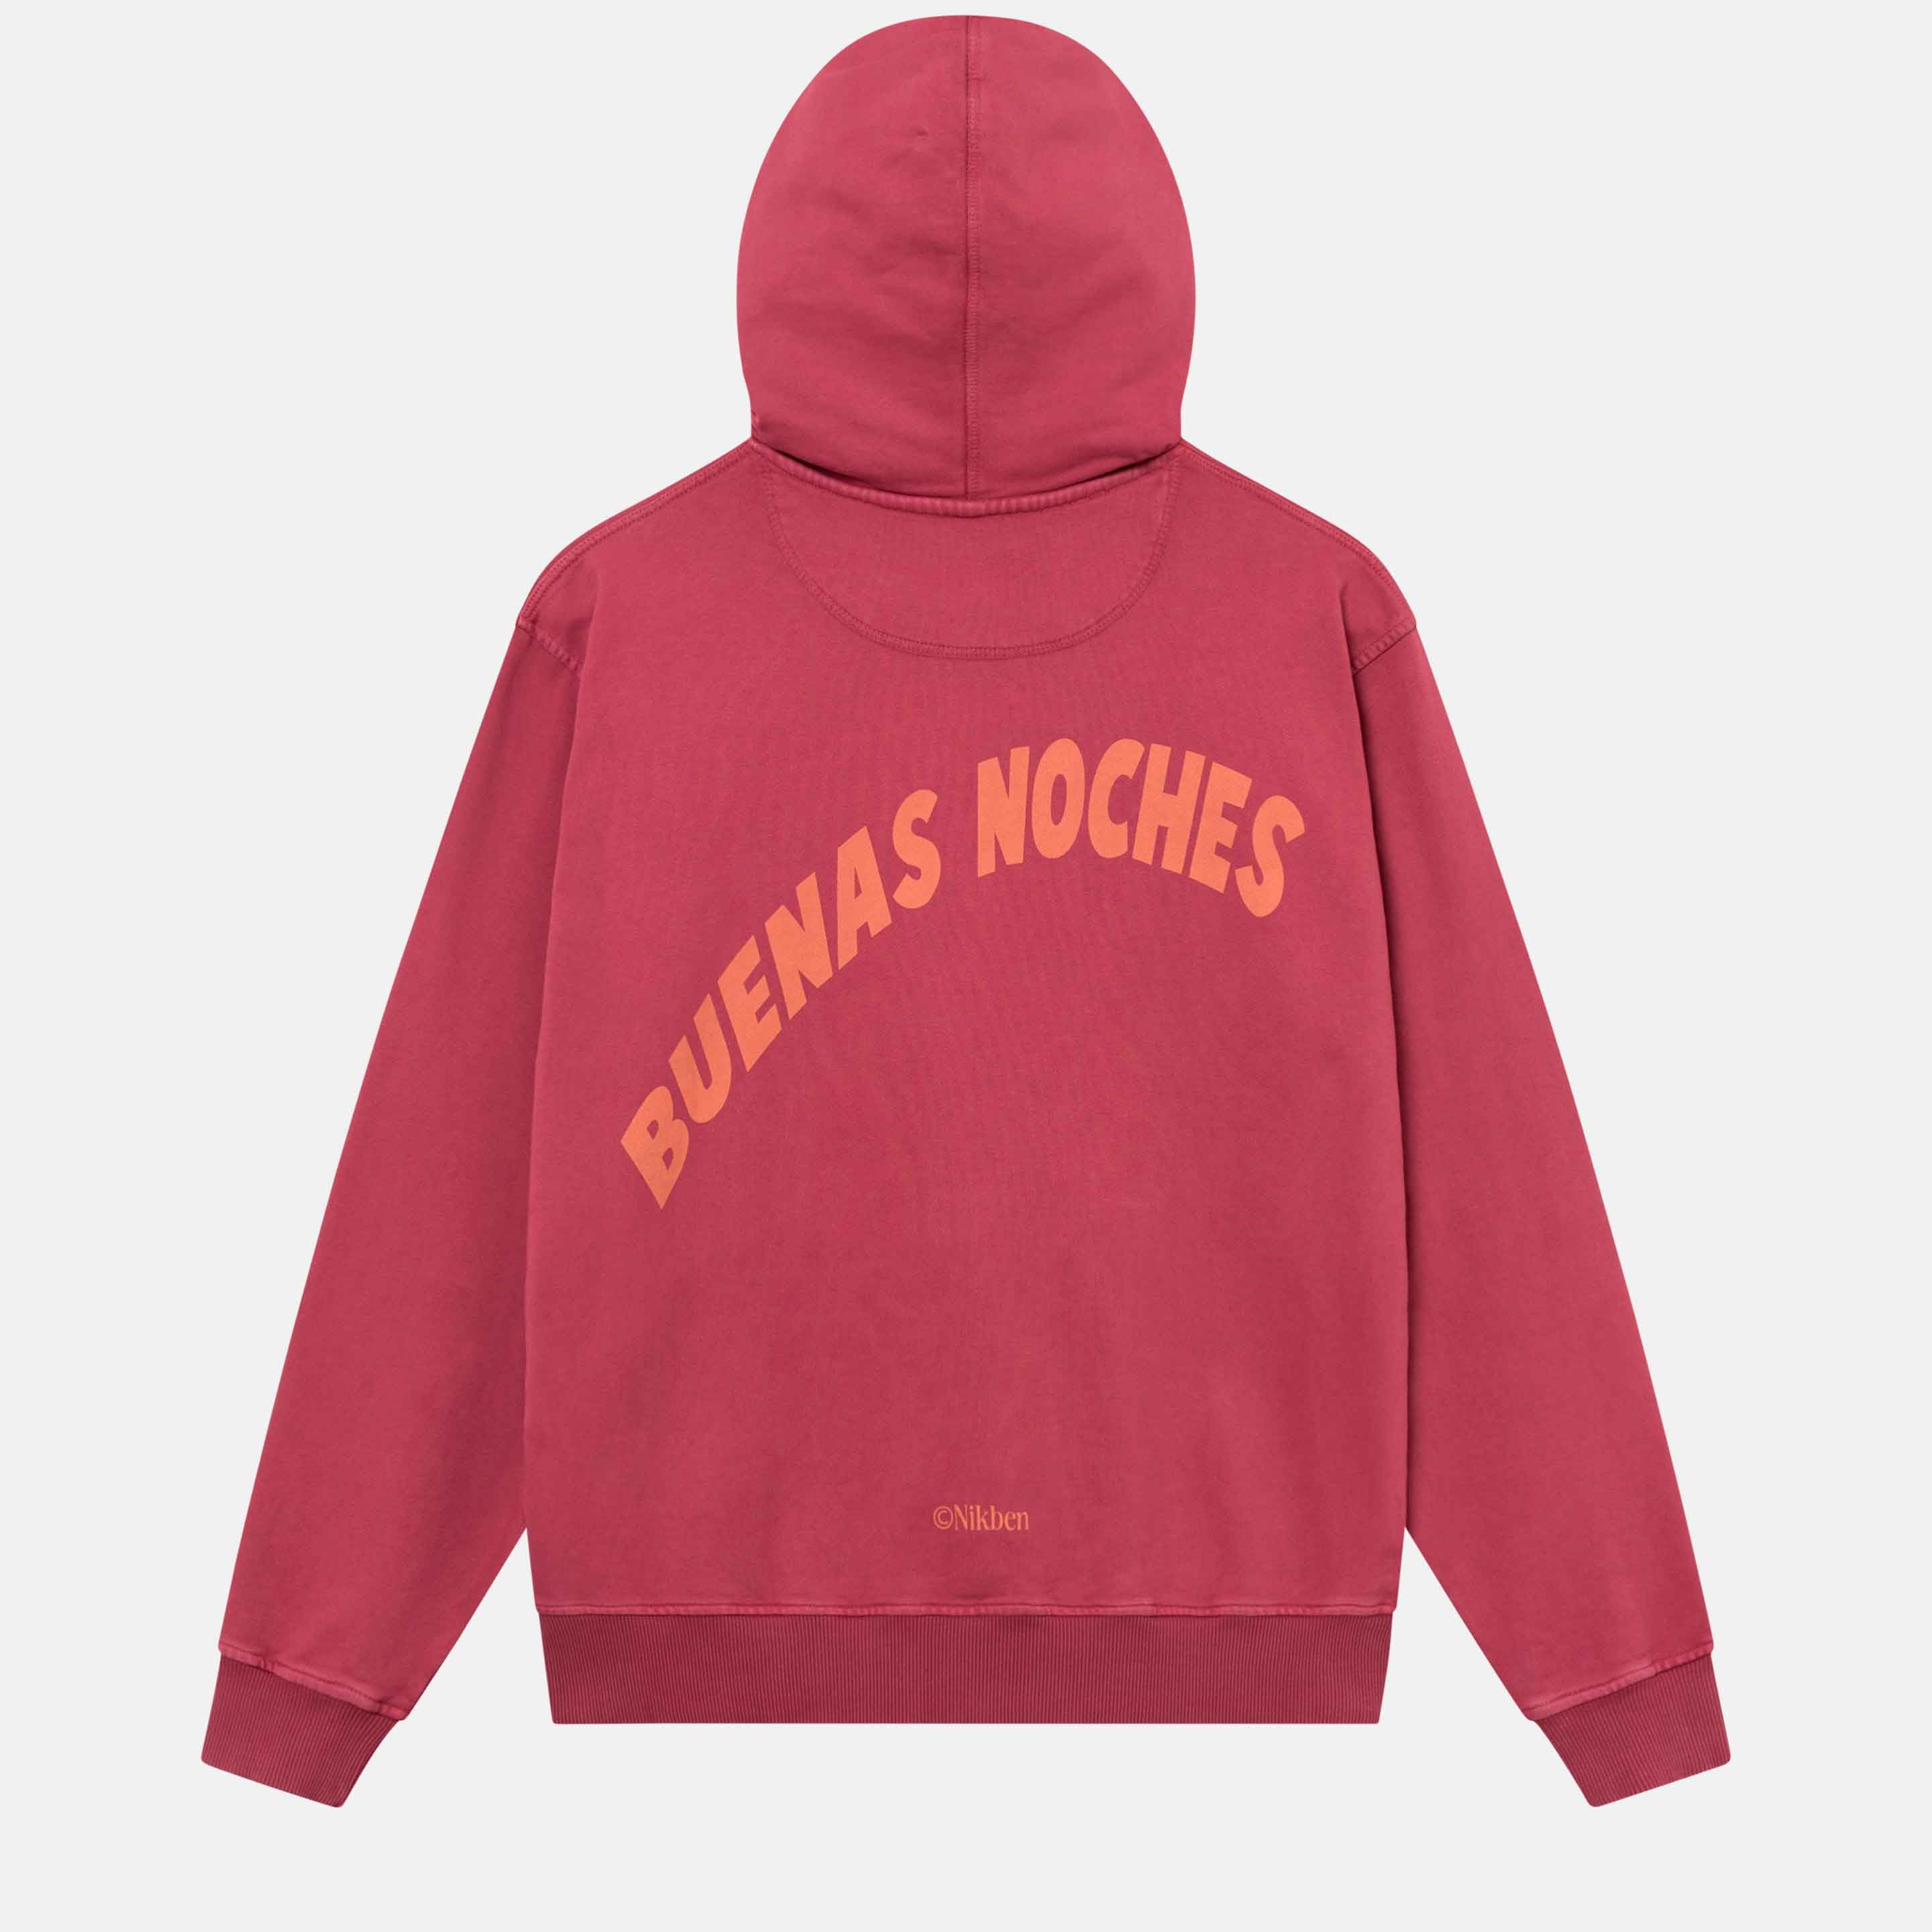 A burgundy hoodie with a large orange "buenas noches" back print